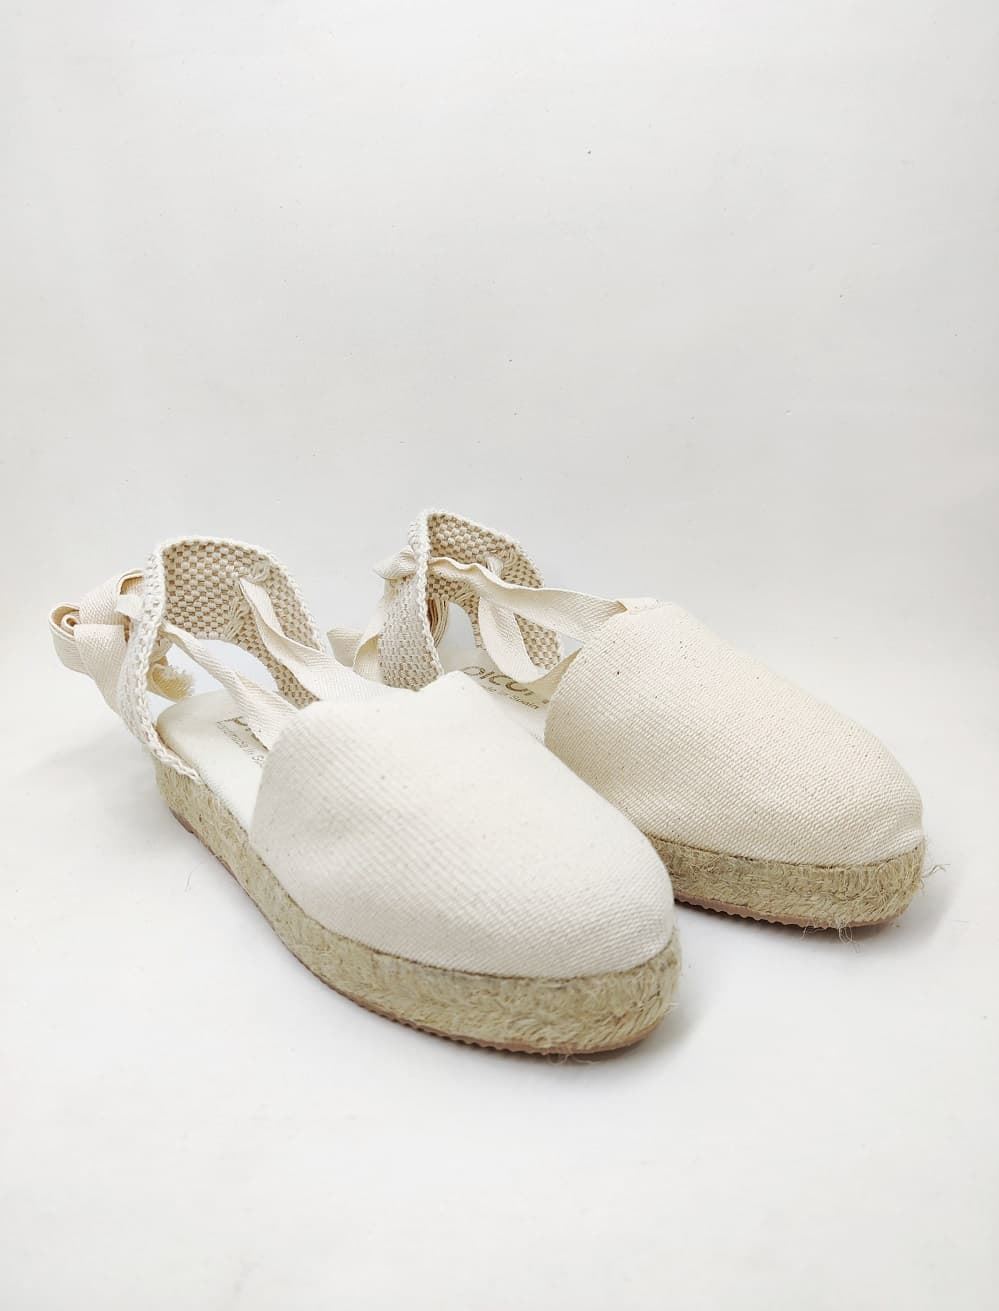 Beige wedge espadrilles with ribbons for girls and women - Image 2